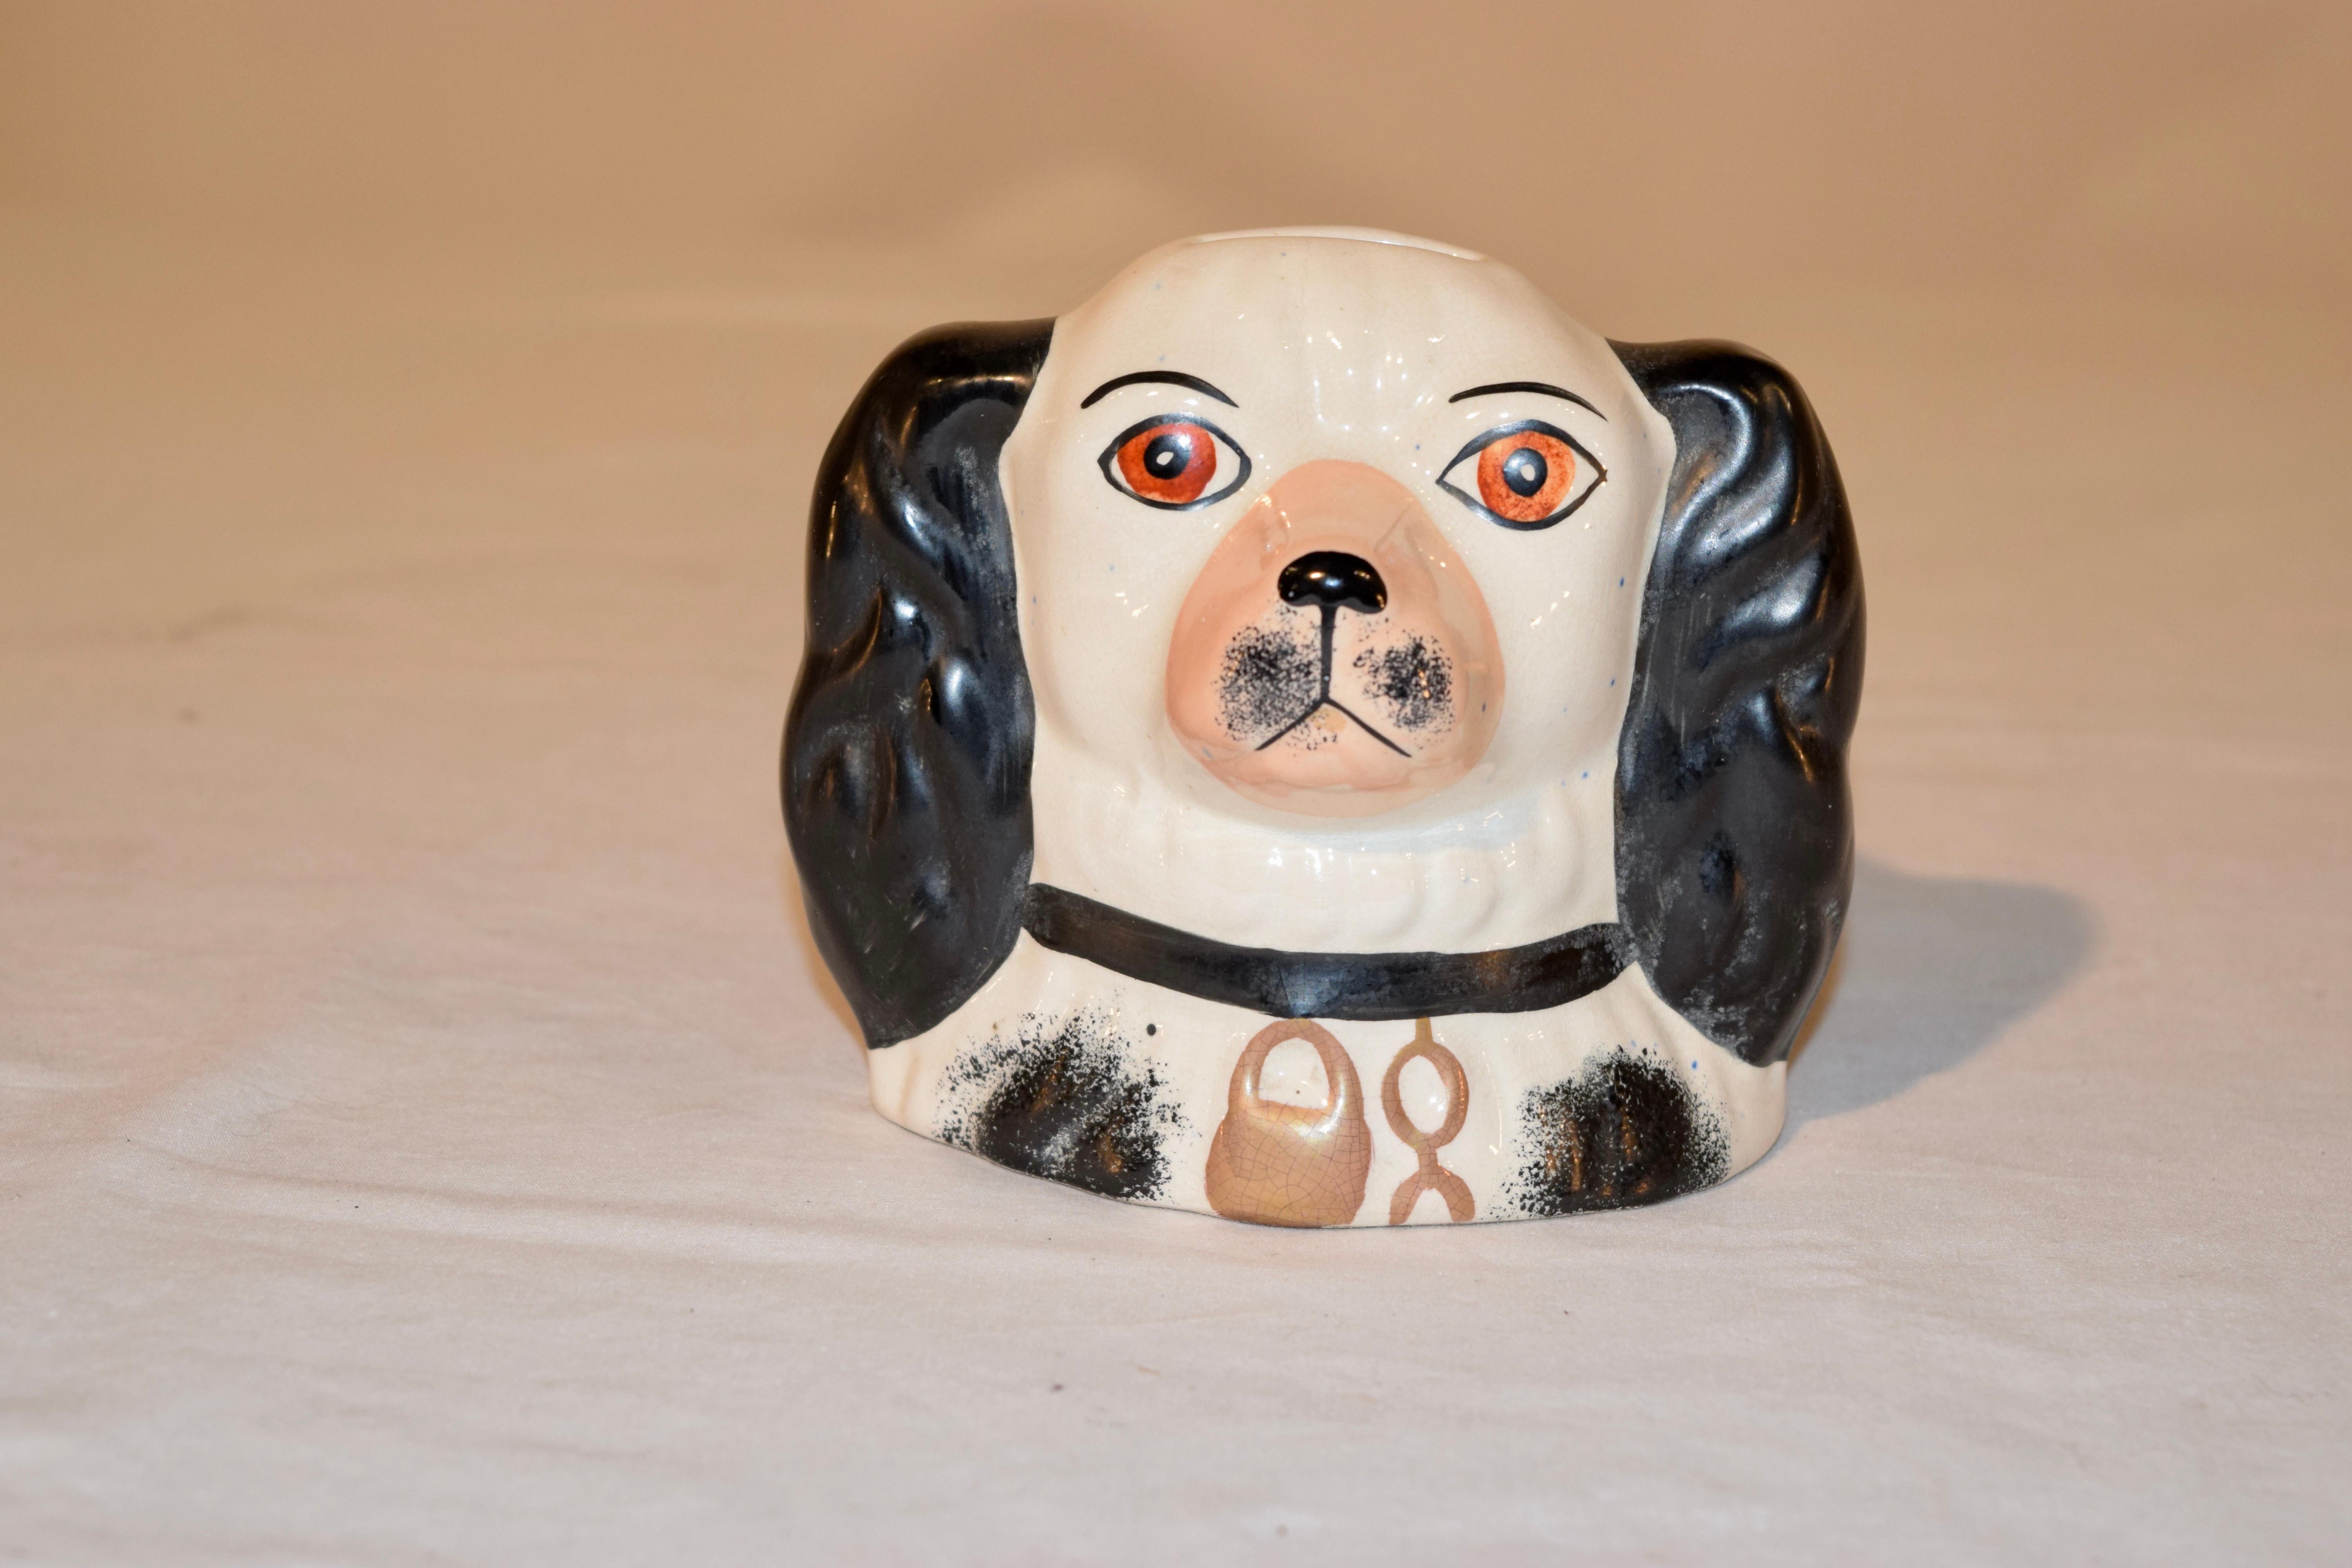 19th century Staffordshire dog bank from England in black and white with hand painted decoration.